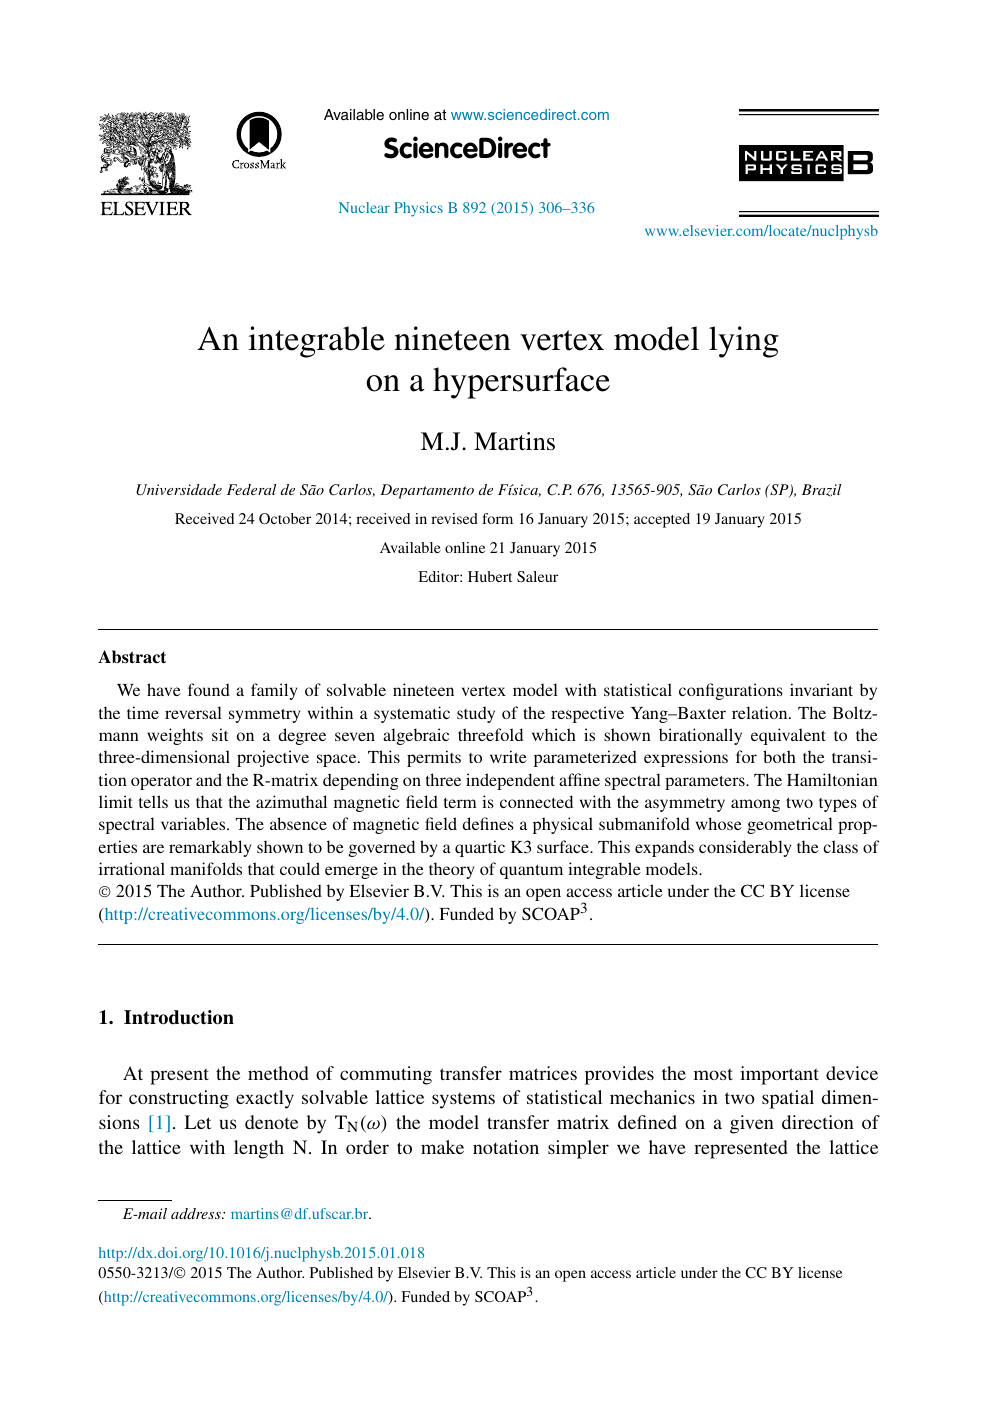 An Integrable Nineteen Vertex Model Lying On A Hypersurface Topic Of Research Paper In Physical Sciences Download Scholarly Article Pdf And Read For Free On Cyberleninka Open Science Hub